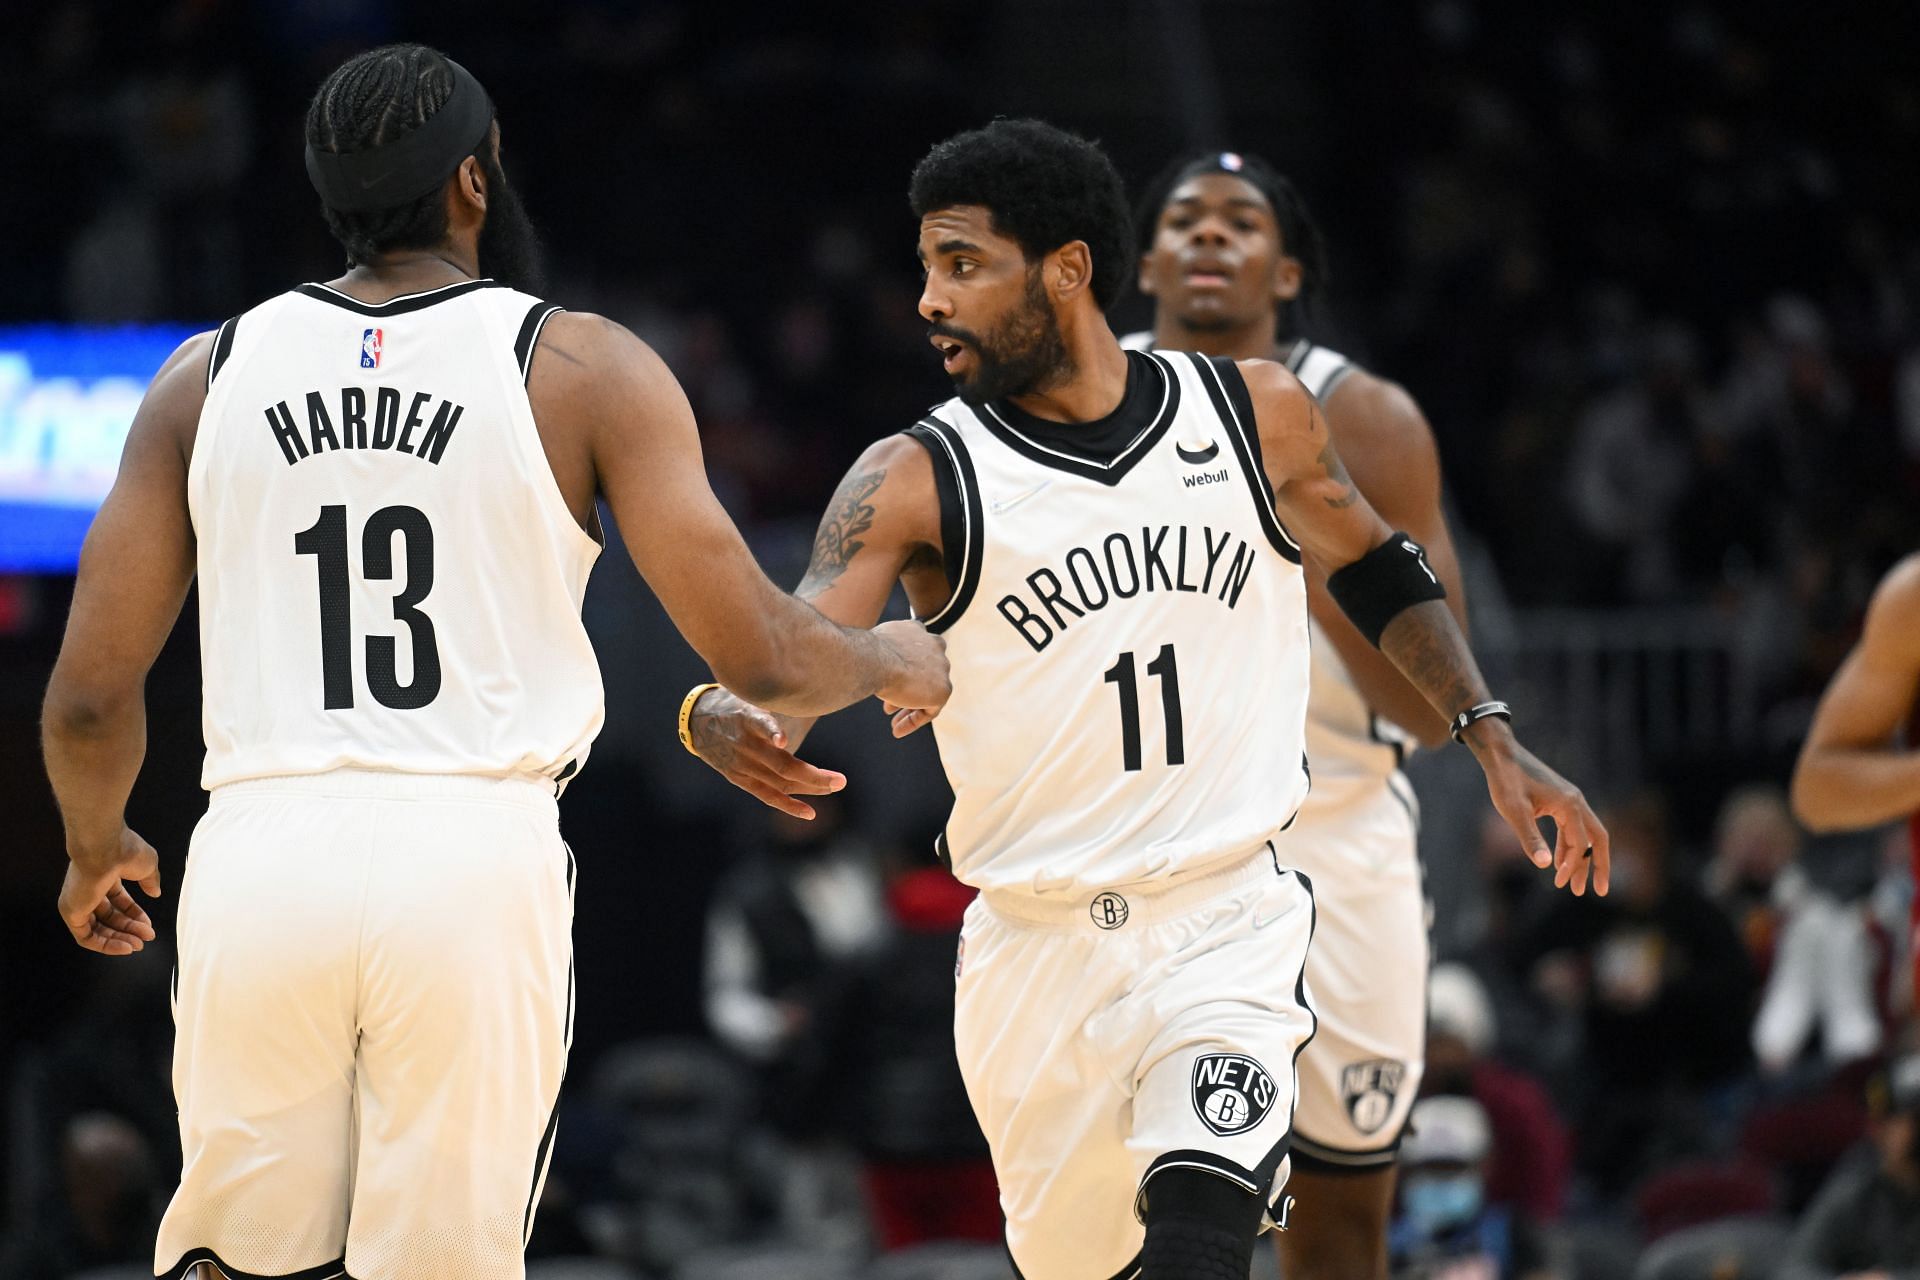 Kyrie Irving and James Harden failed to inspire the Brooklyn Nets against the Sacramento Kings